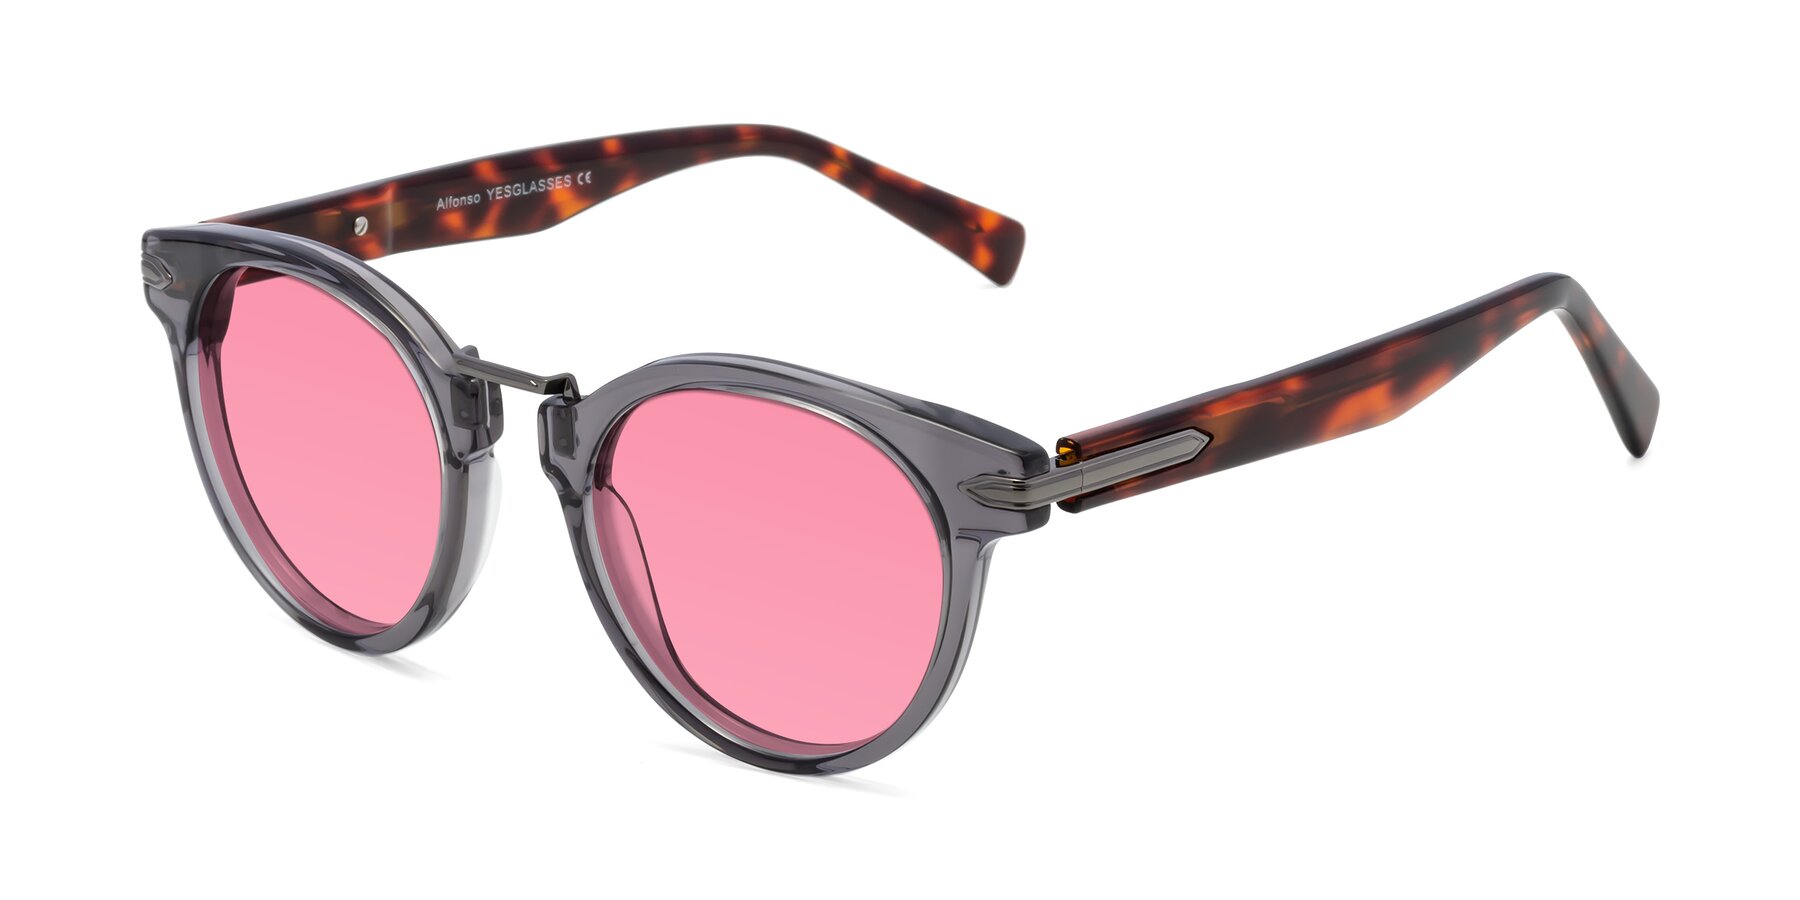 Angle of Alfonso in Gray /Tortoise with Pink Tinted Lenses